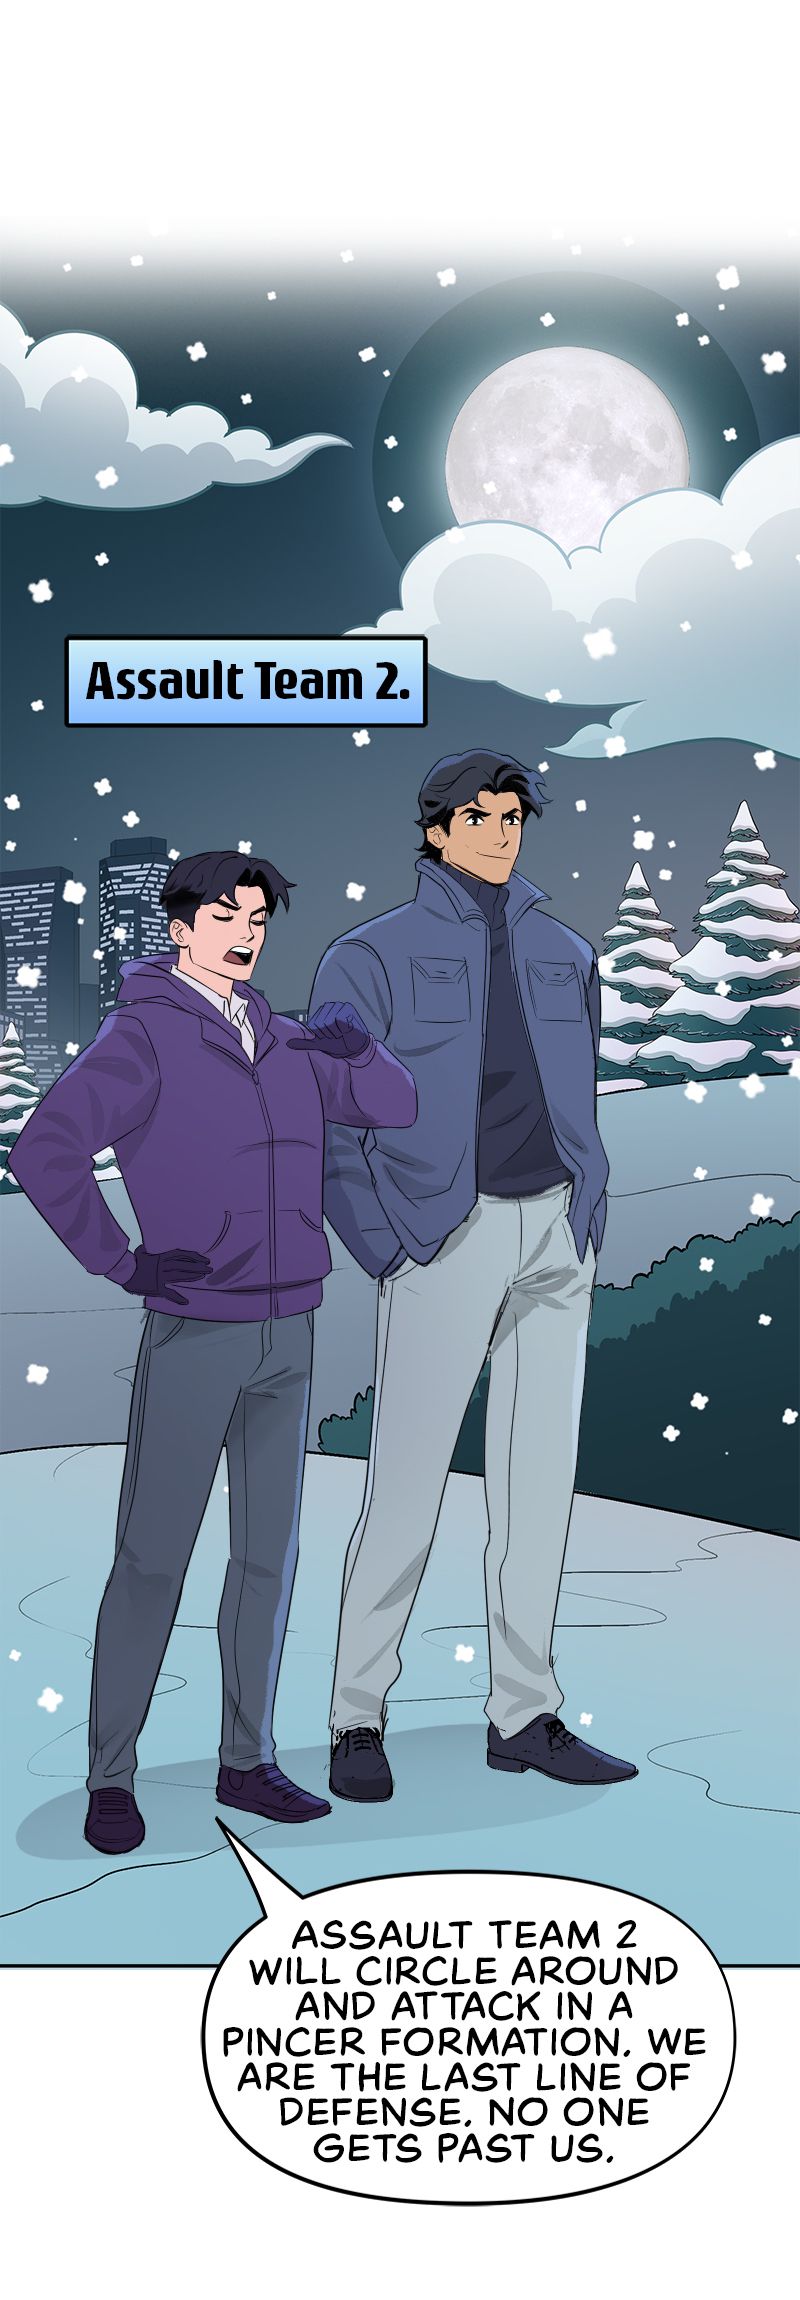 Tim Drake discusses snowball fight tactics with Nightwing in Batman: Wayne Family Adventures.